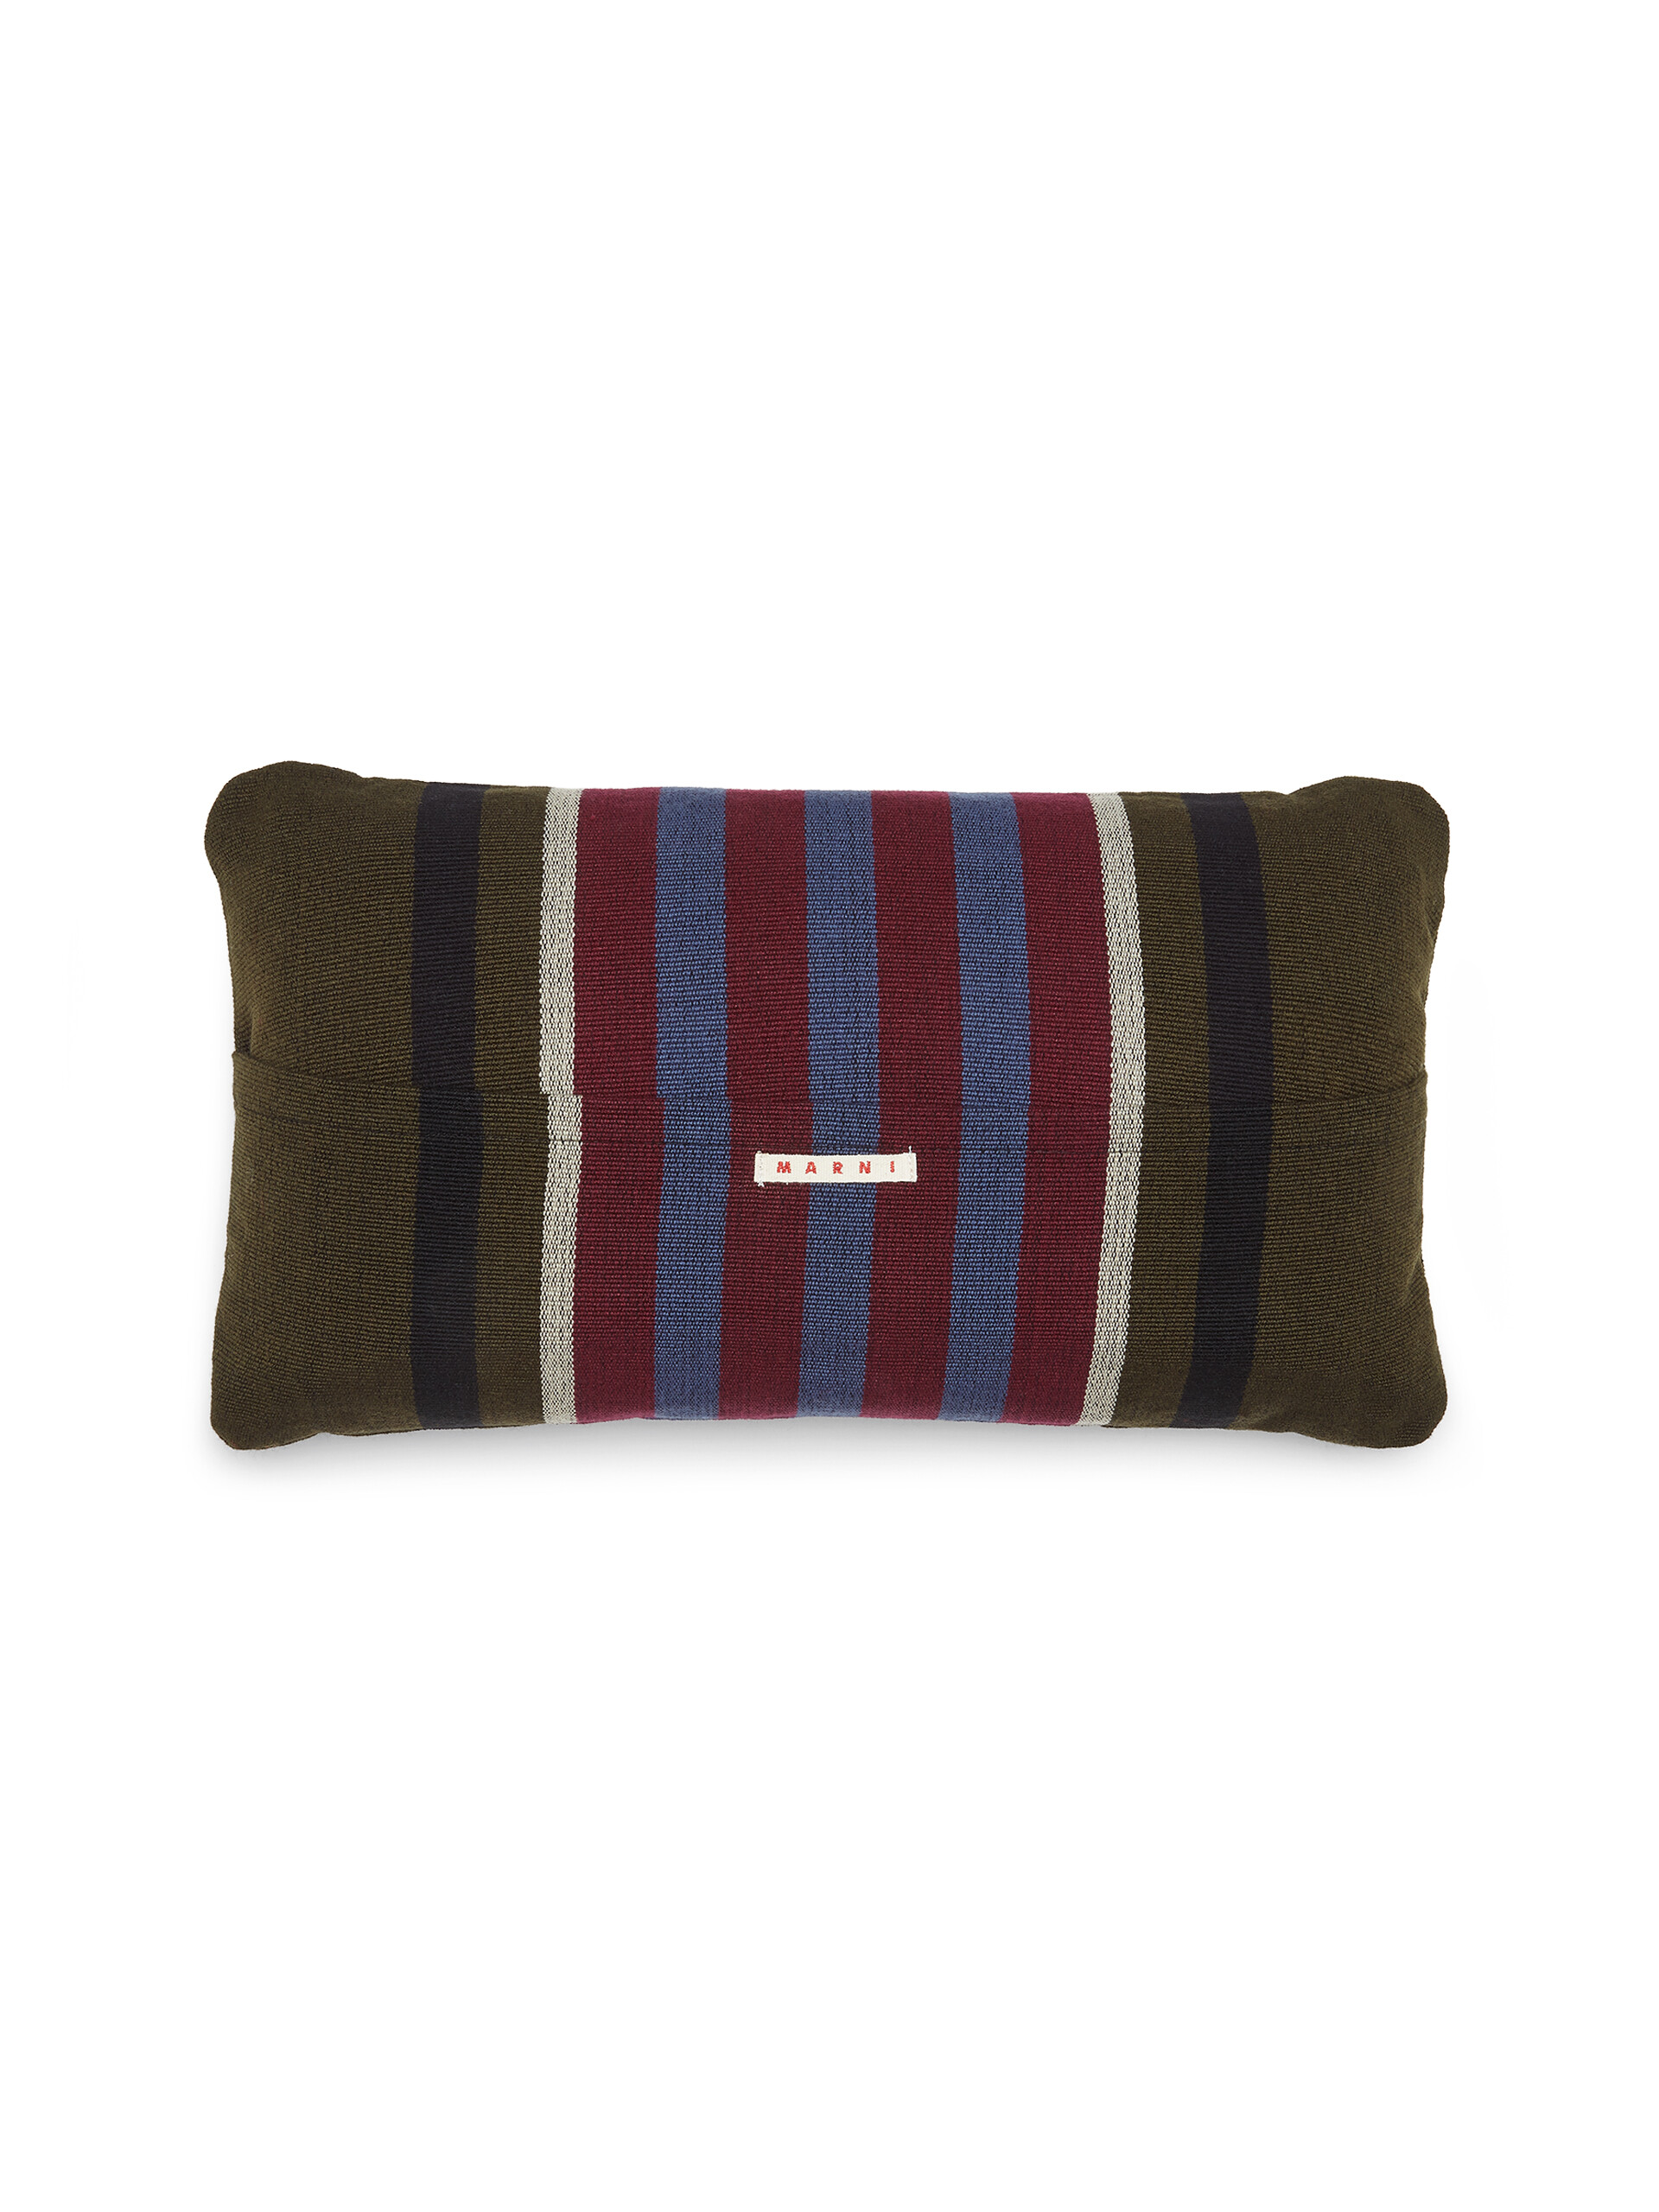 MARNI MARKET rectangular pillow cover in polyester with green burgundy and pale blue vertical stripes - Furniture - Image 2